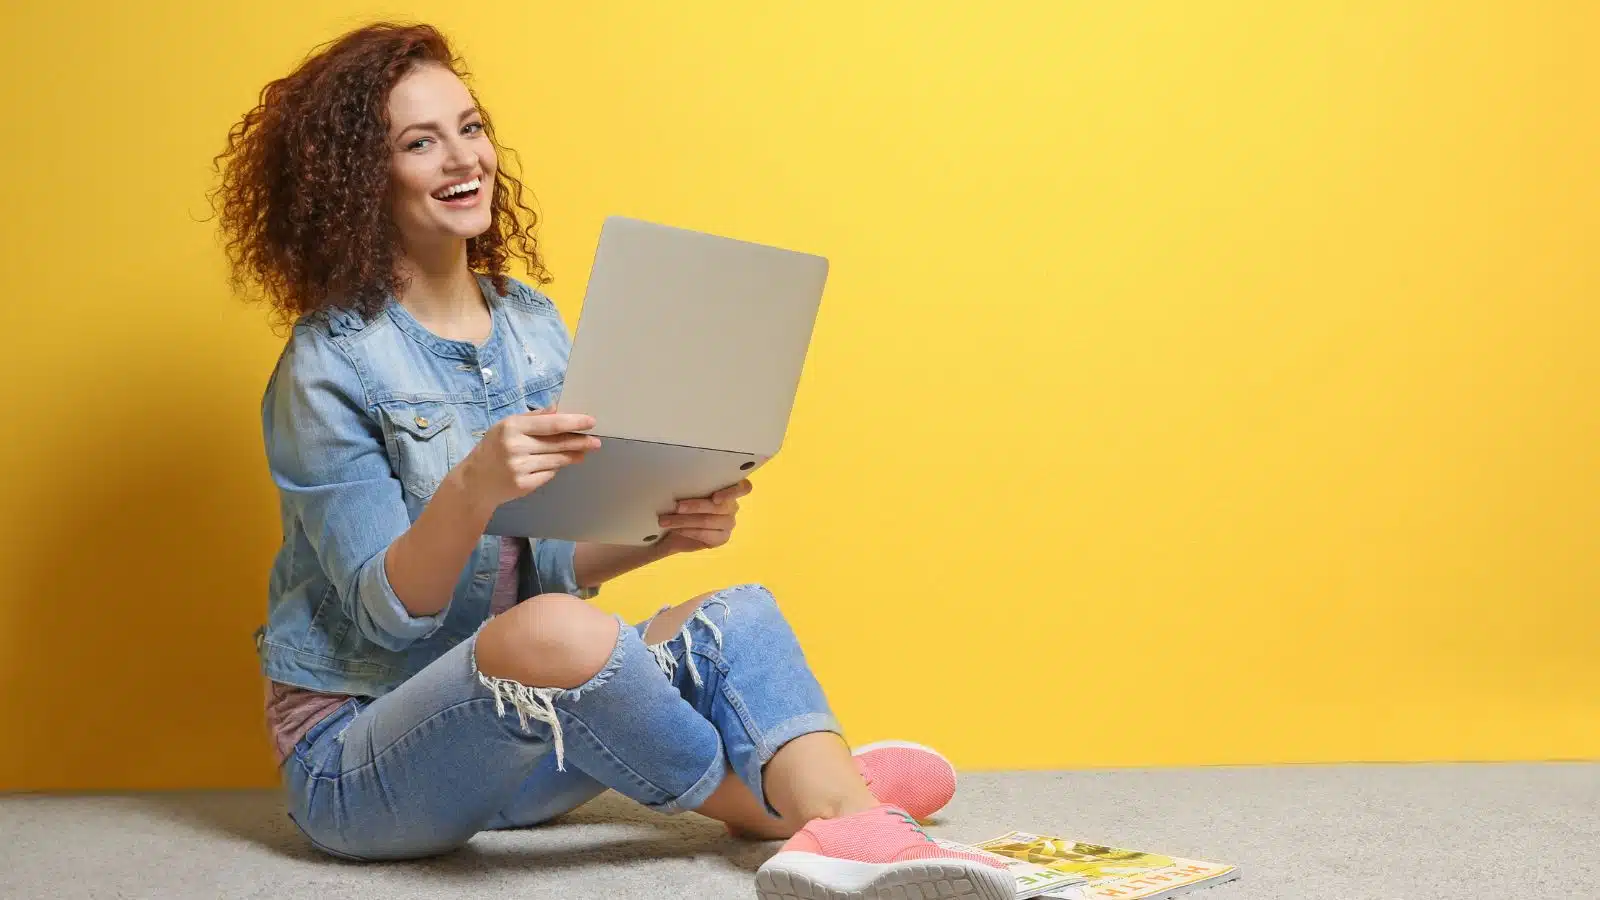 young woman using a laptop on a yellow background